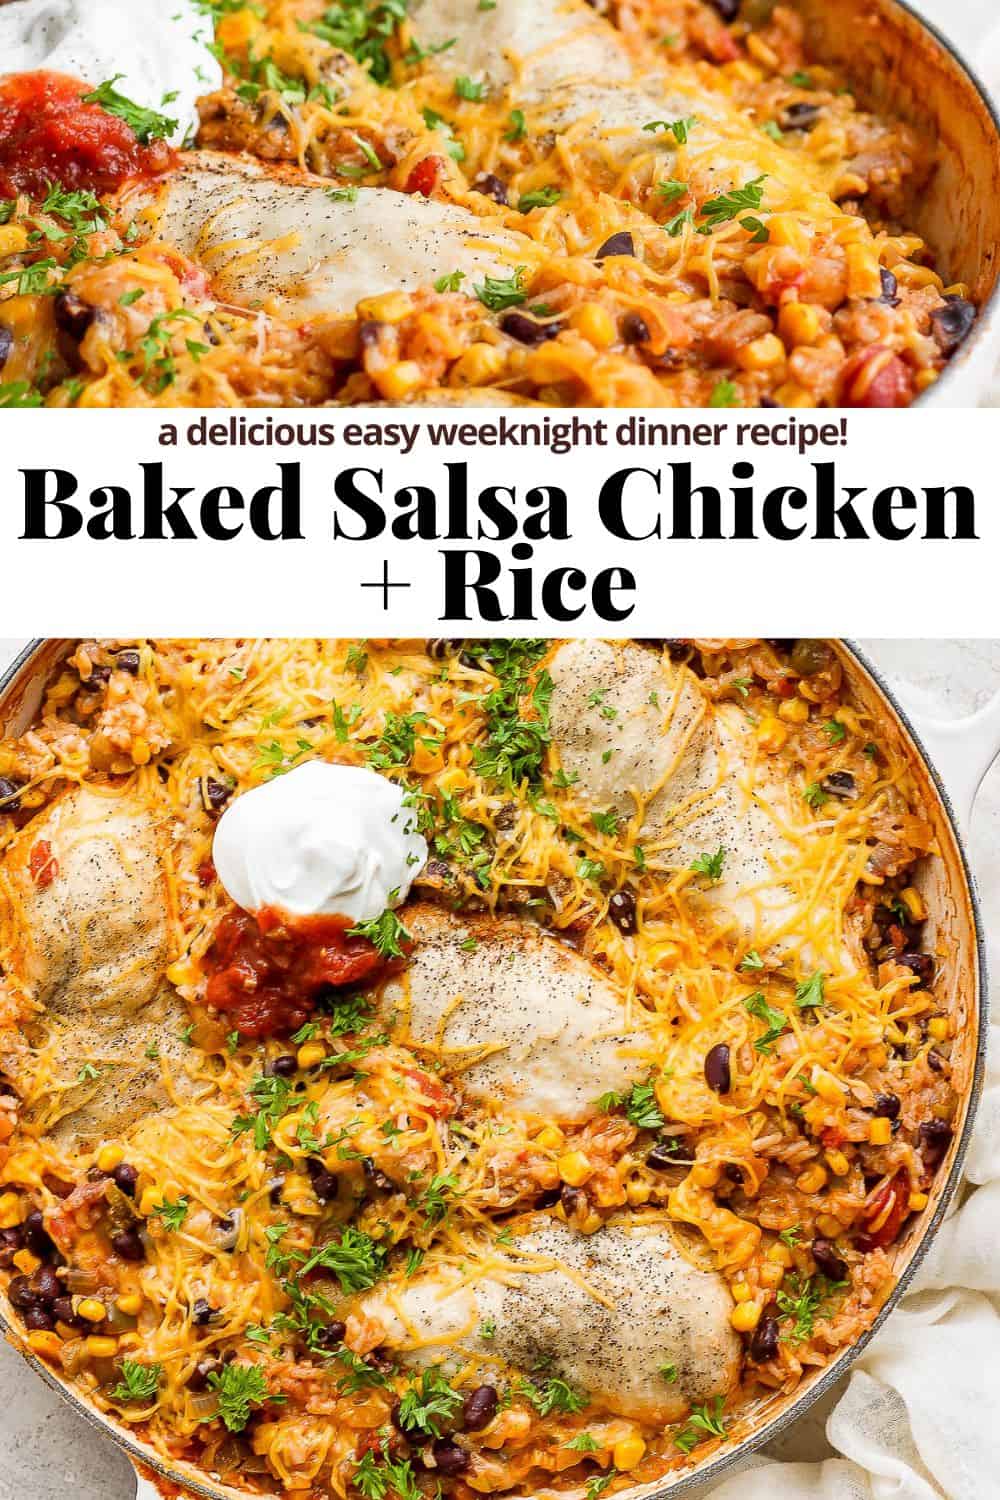 Pinterest image for baked salsa chicken and rice.